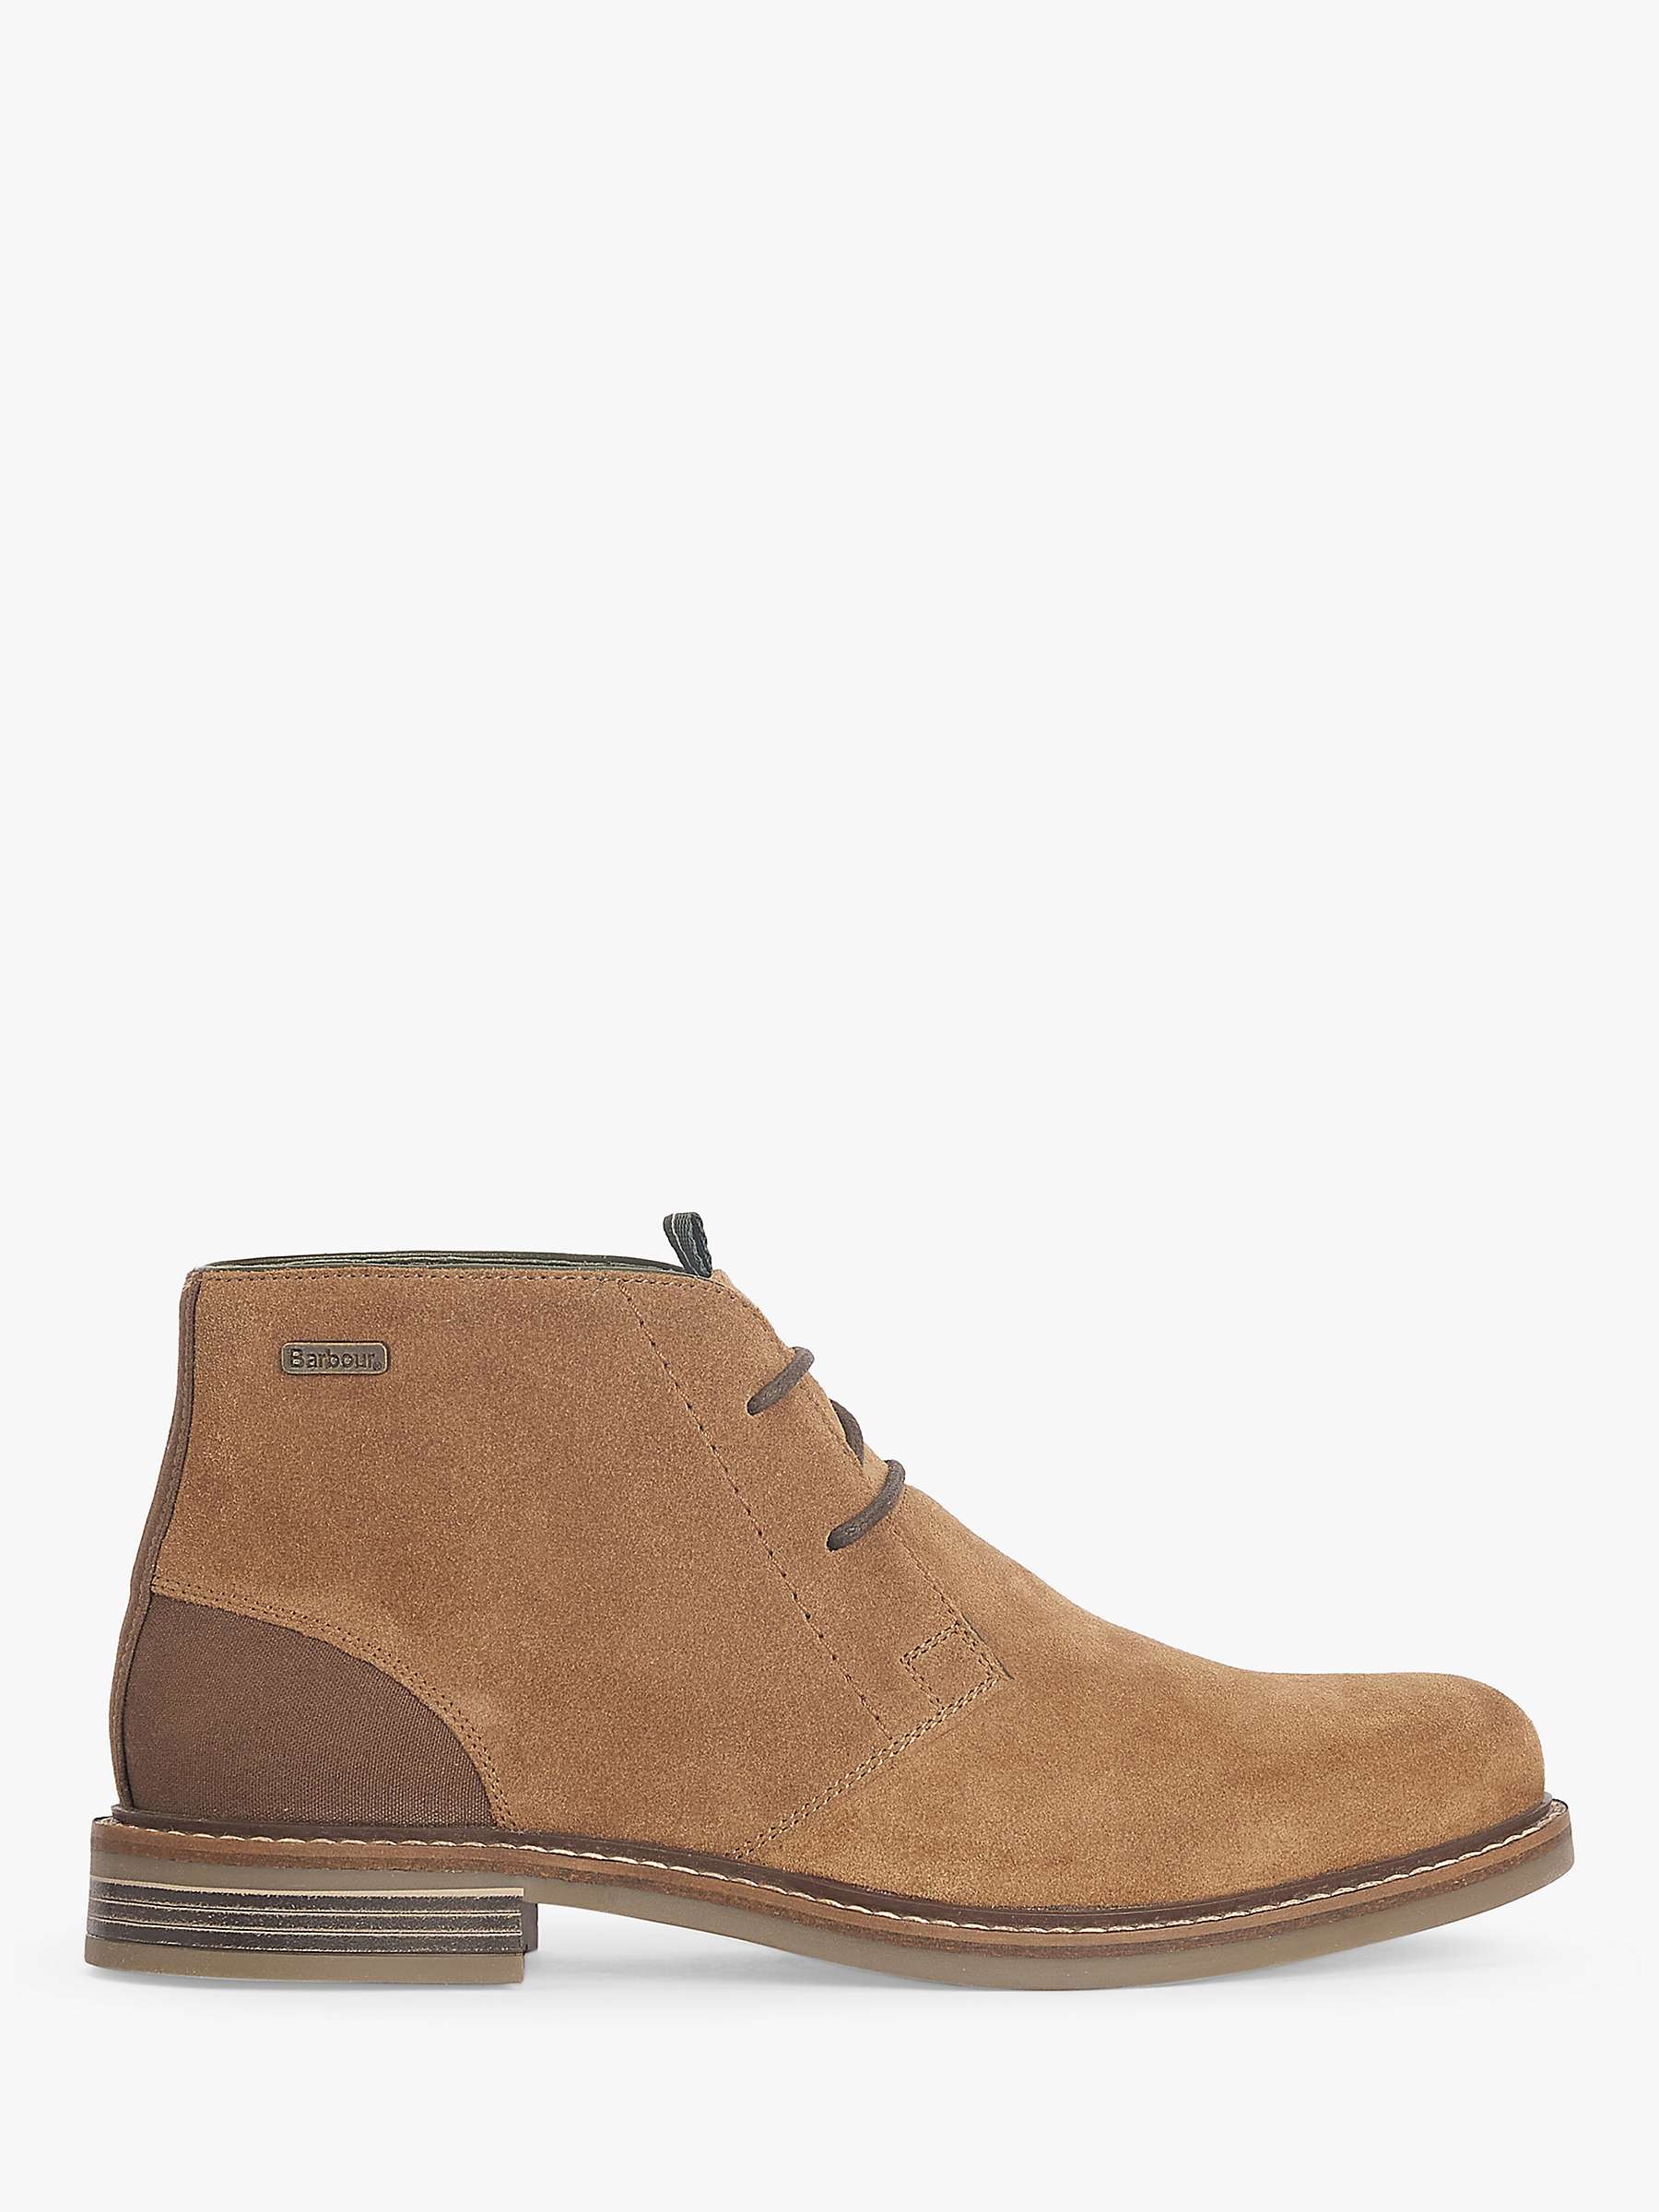 Buy Barbour Readhead Chukka Fawn Suede Boots, Fawn Suede Online at johnlewis.com